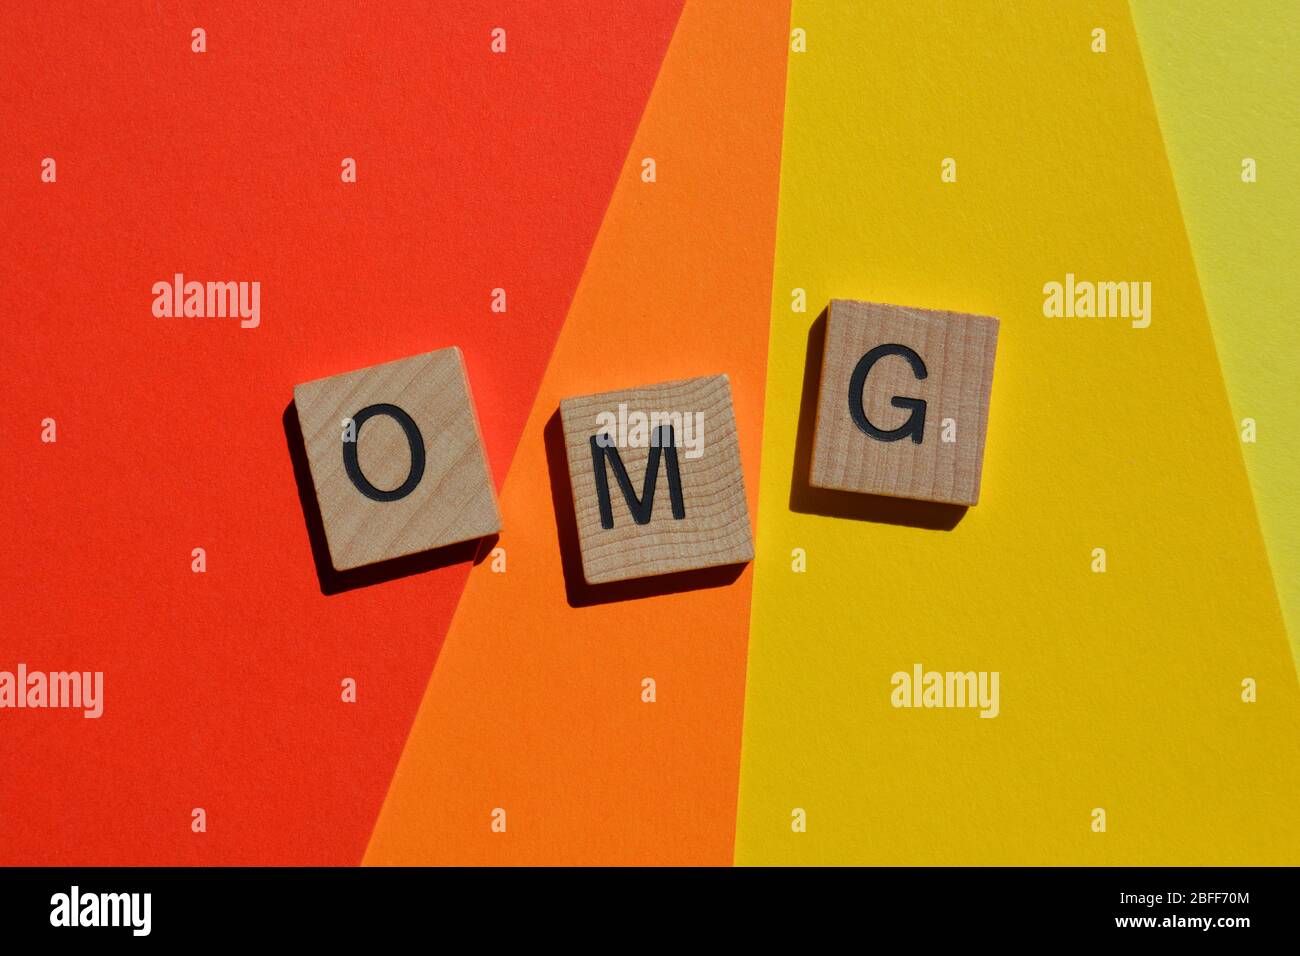 OMG, acronym for Oh My God isolated on brightly coloured background Stock Photo